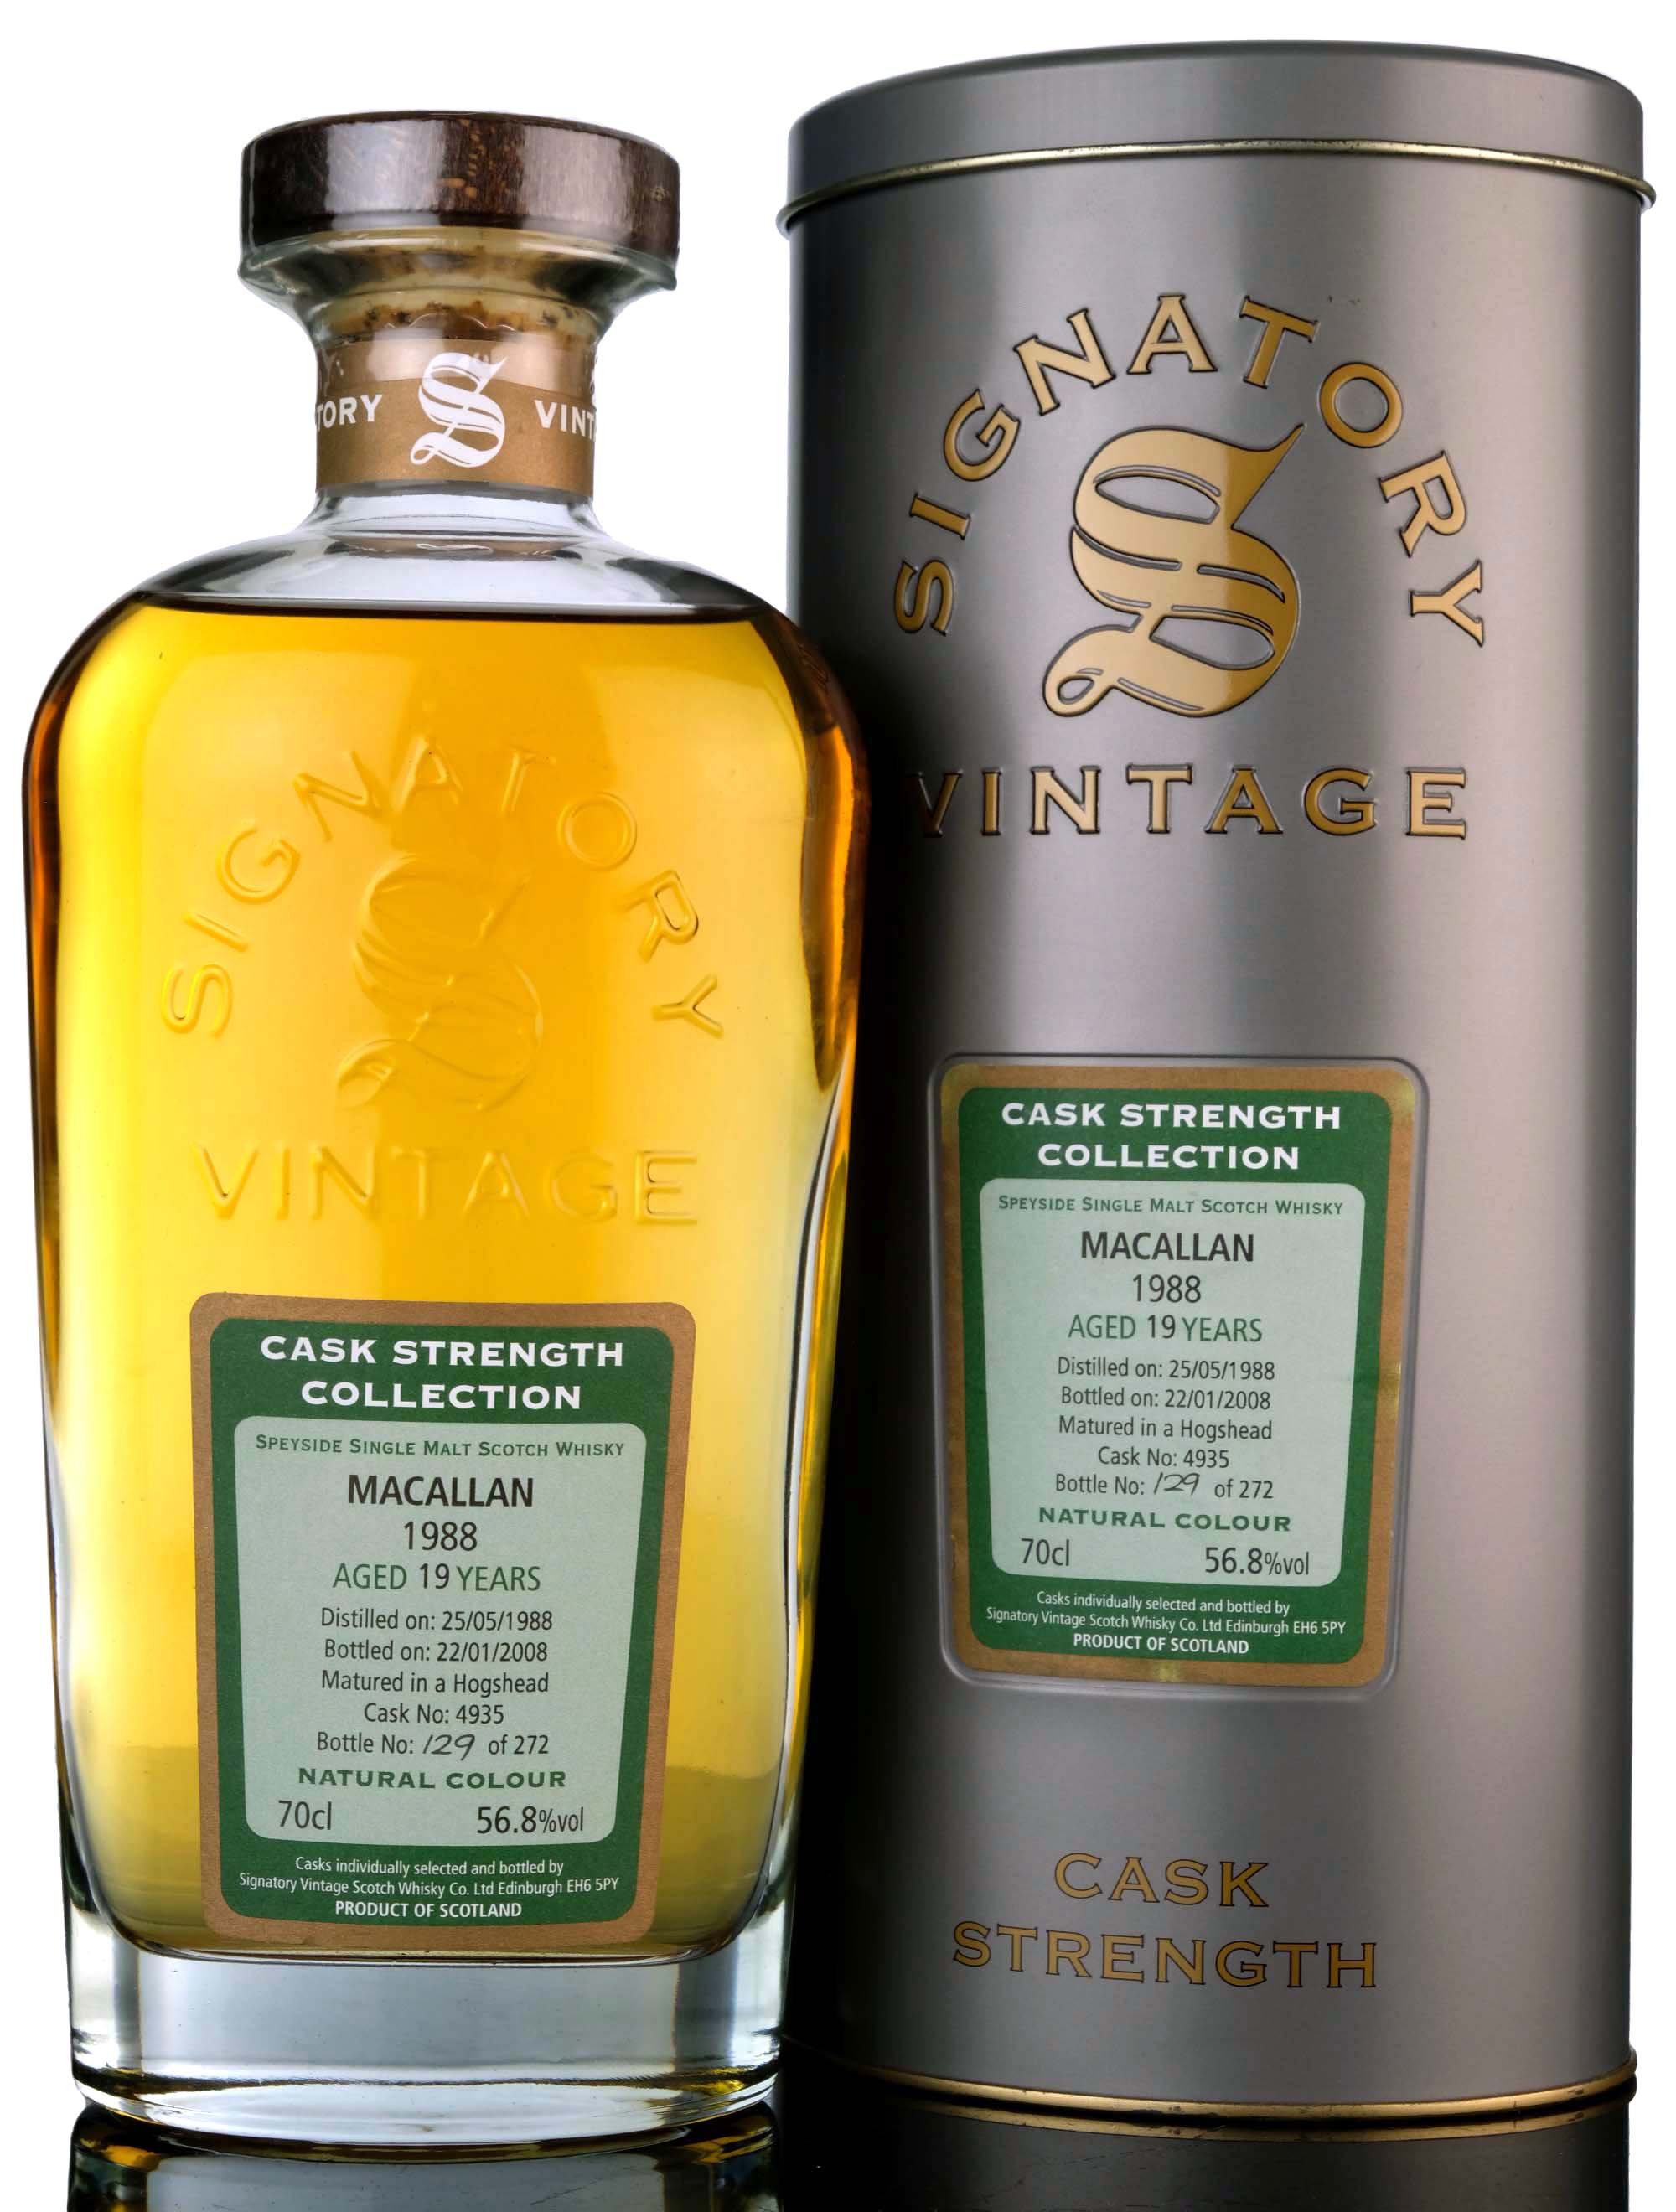 Macallan 1988-2008 - 19 Year Old - Signatory Vintage - Cask Strength Collection - Single C